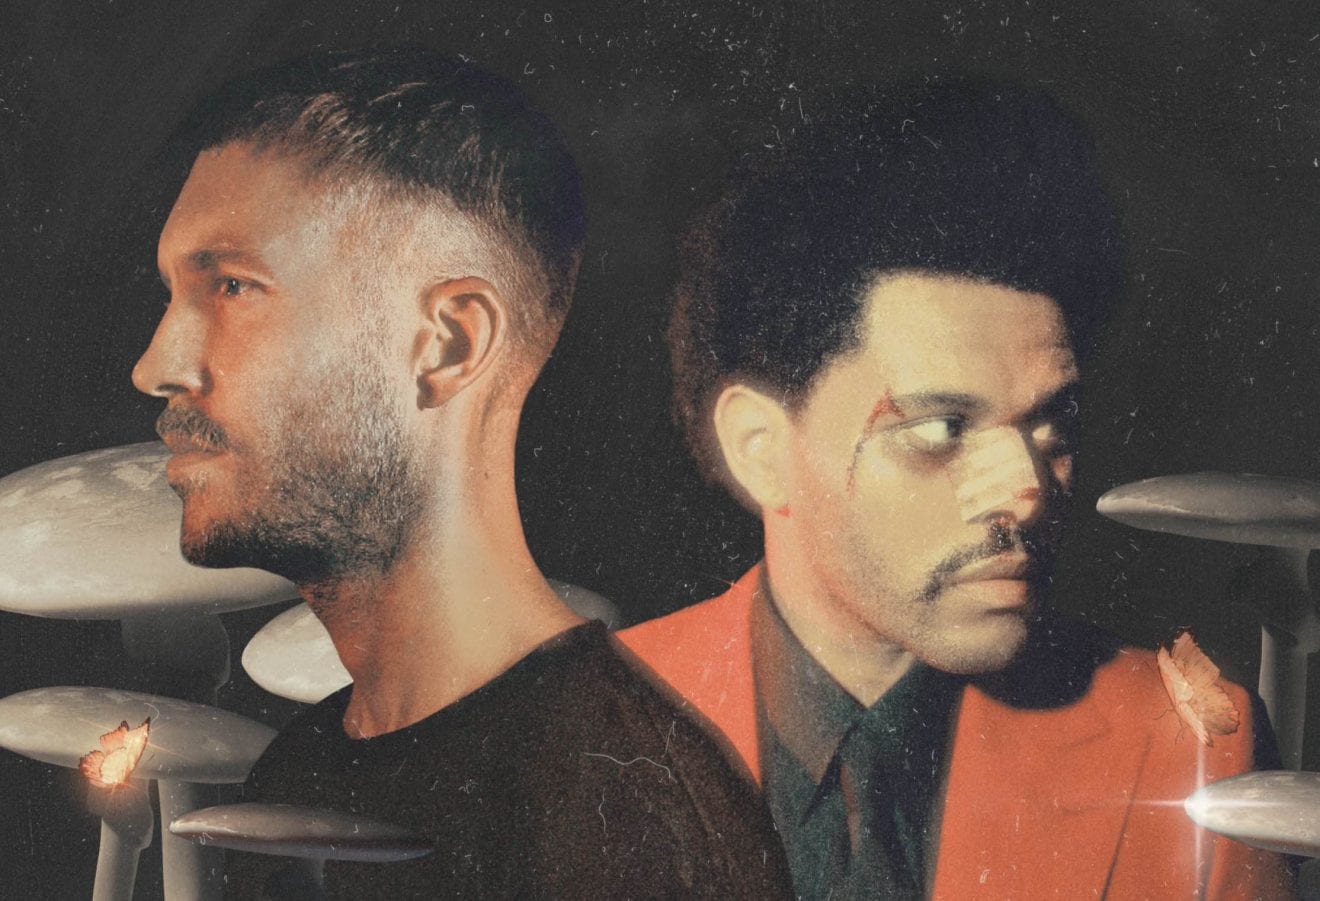 The Weeknd Joins Calvin Harris on New Song, “Over Now”